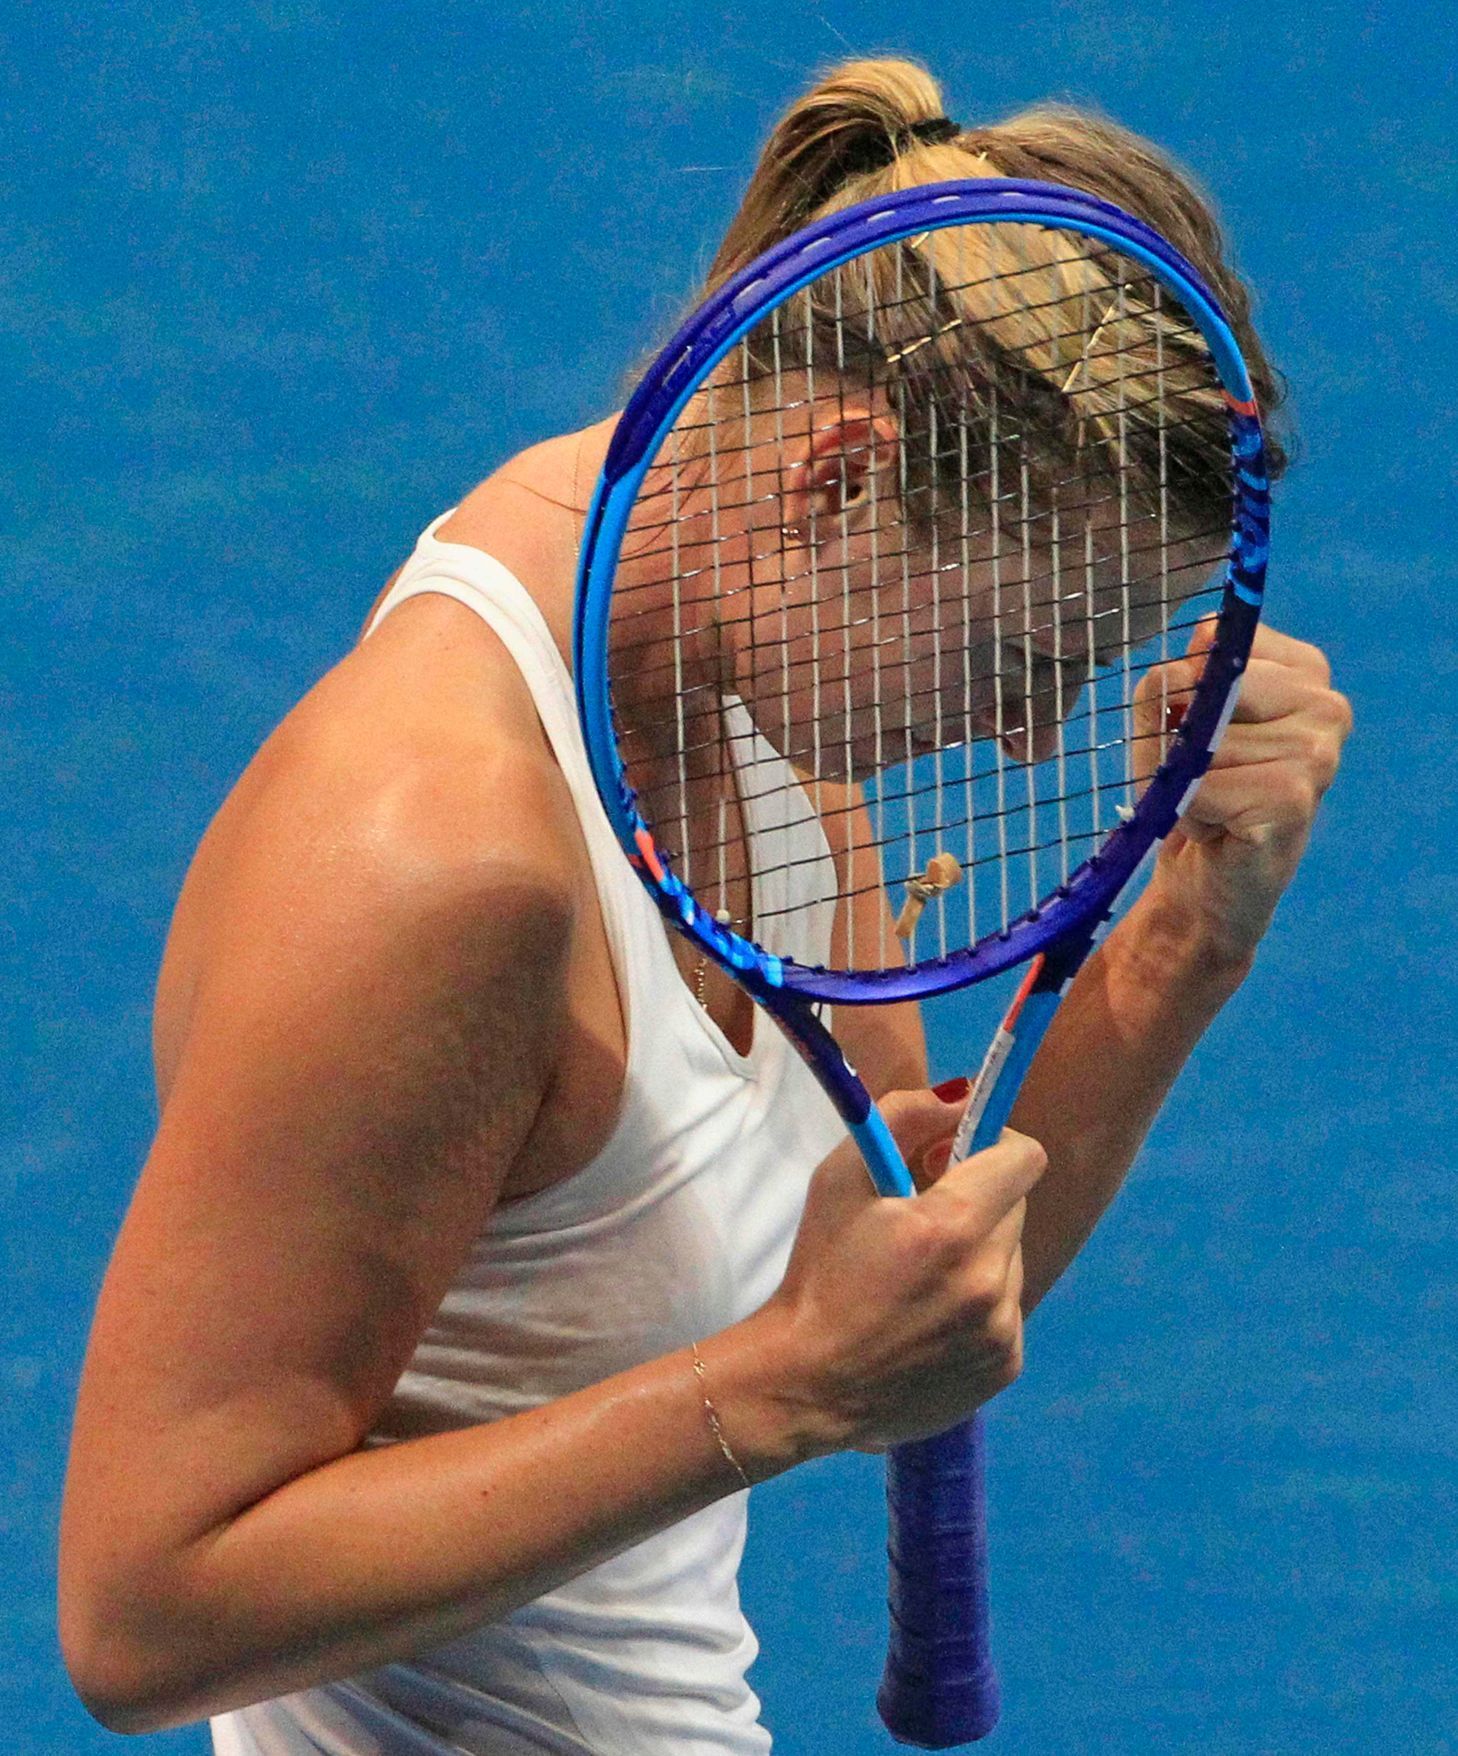 Sharapova of the Manila Mavericks team gestures after beating Mladenovic of the UAE Royals team during their women's singles tennis match at the IPTL competition in Manila